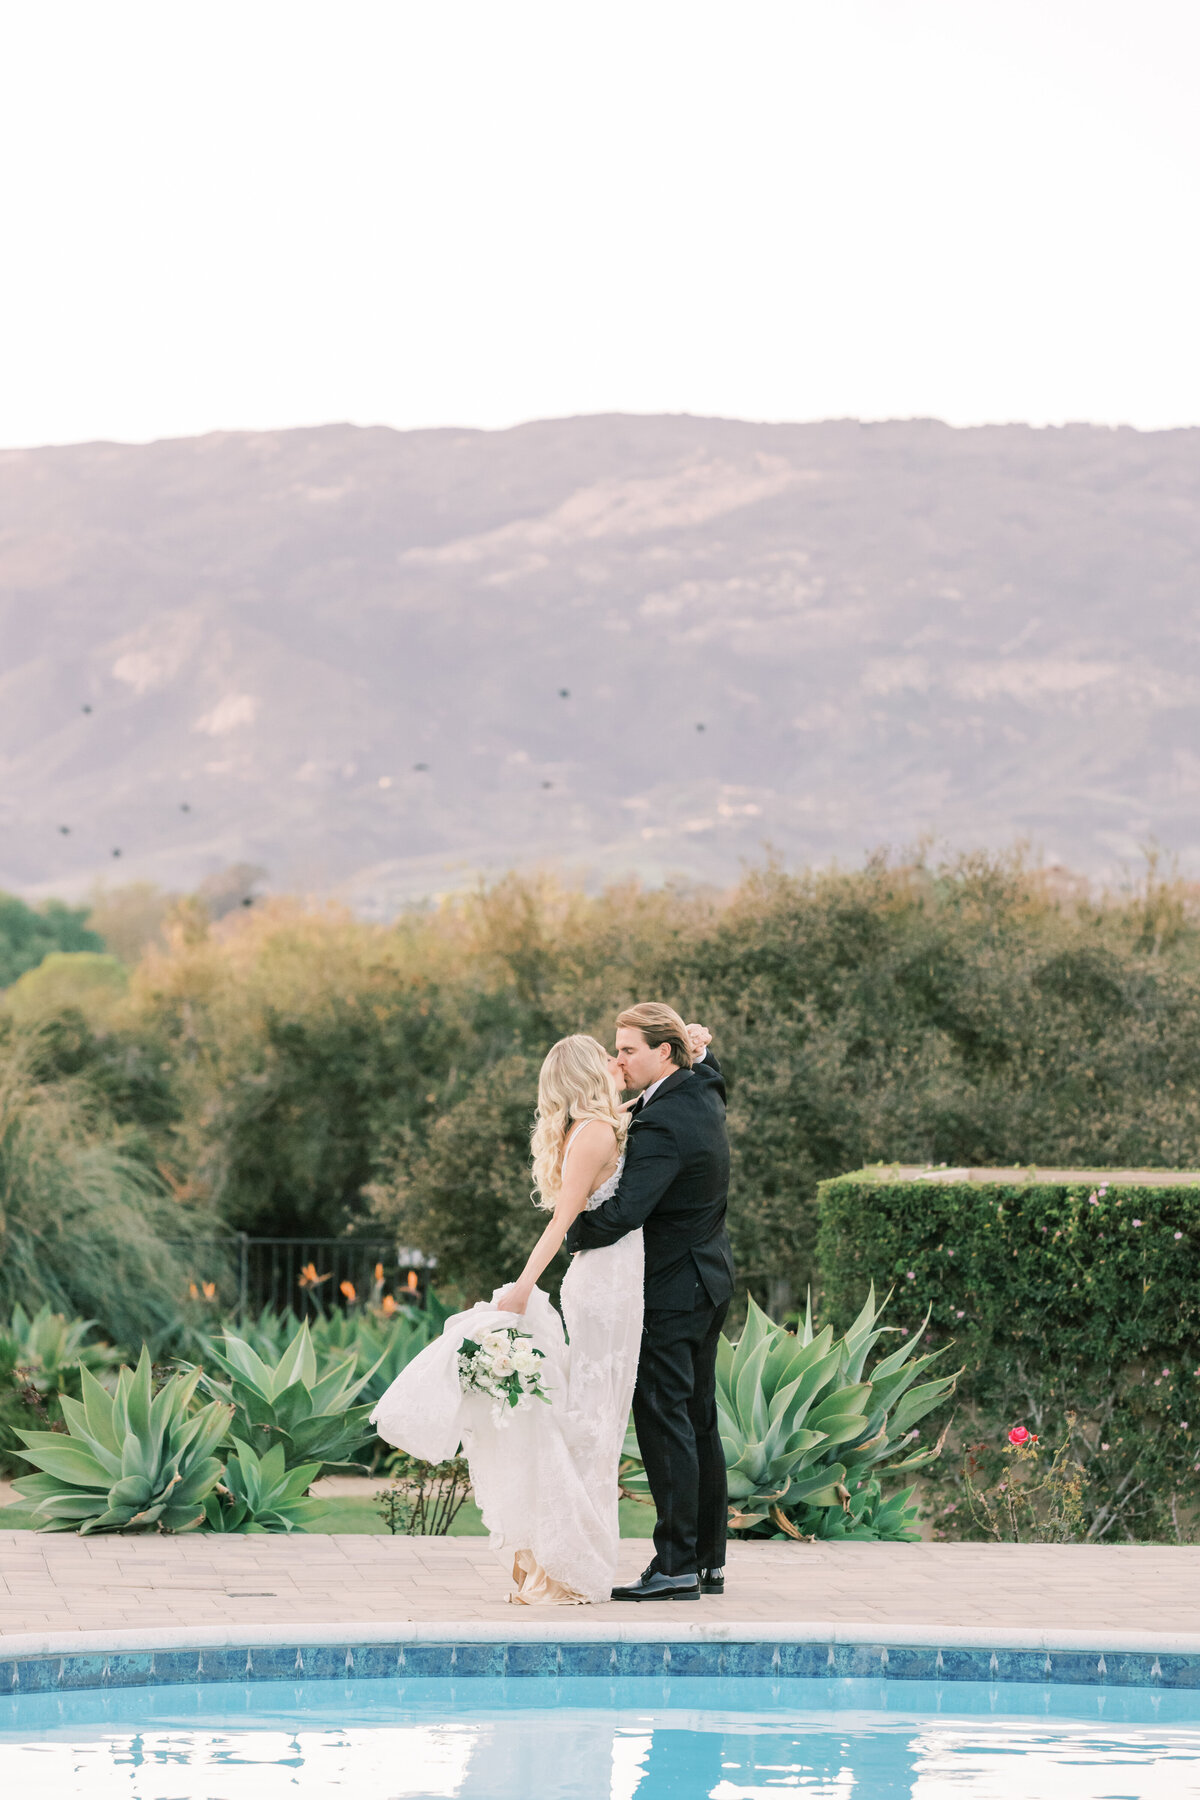 Jocelyn and Spencer Photography California Santa Barbara Wedding Engagement Luxury High End Romantic Imagery Light Airy Fineart Film Style19